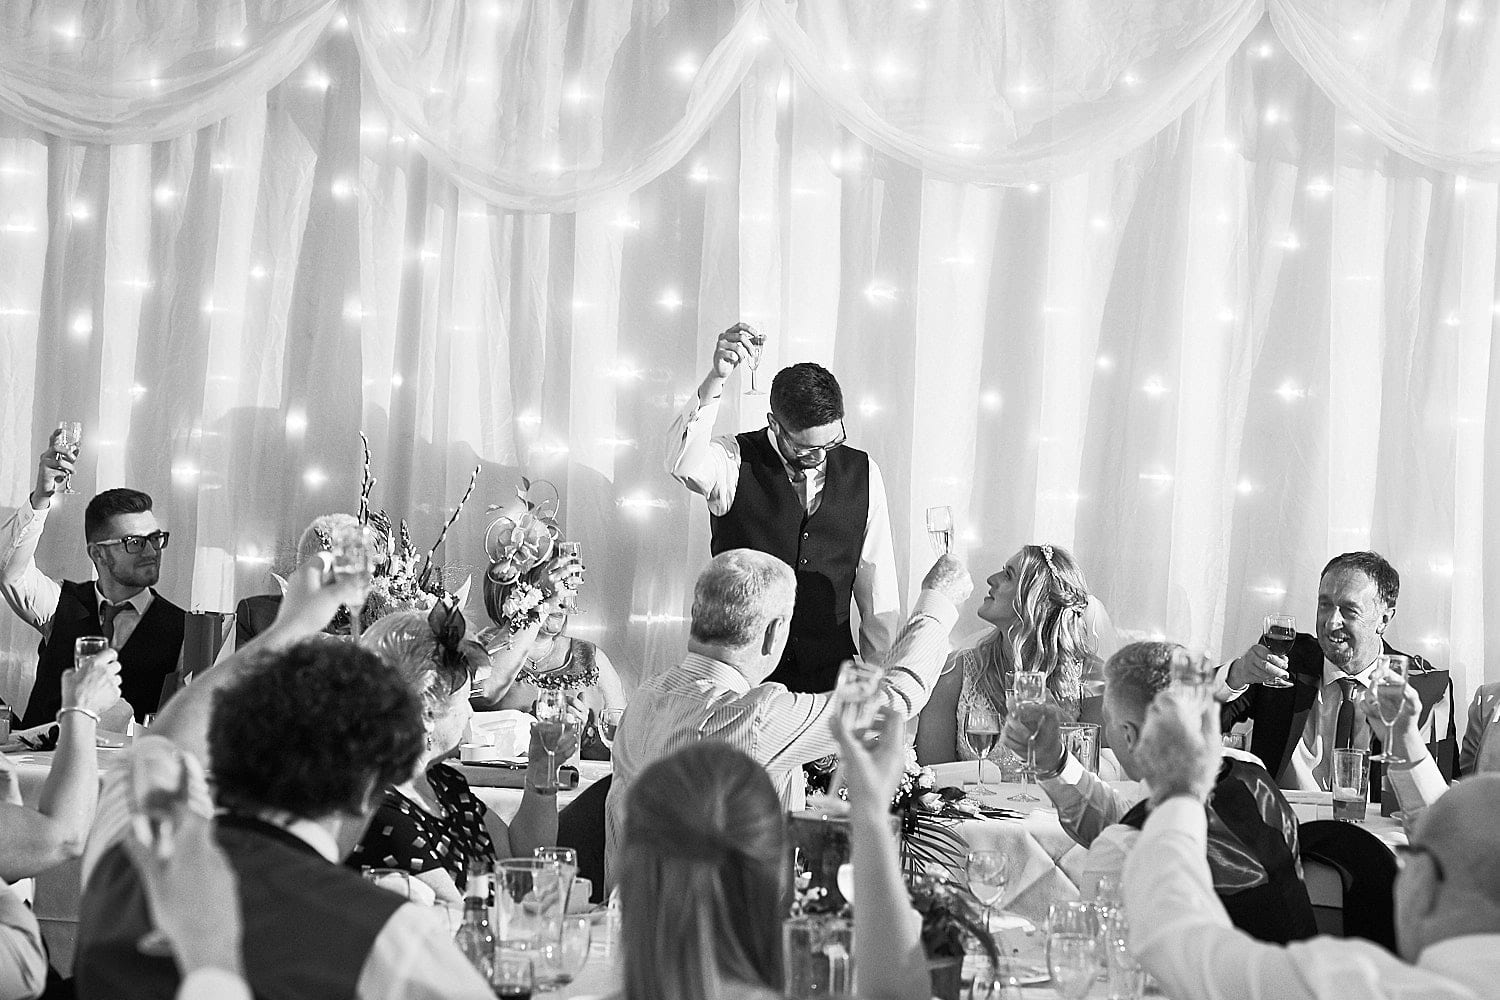 A groom toasts the room during his speech